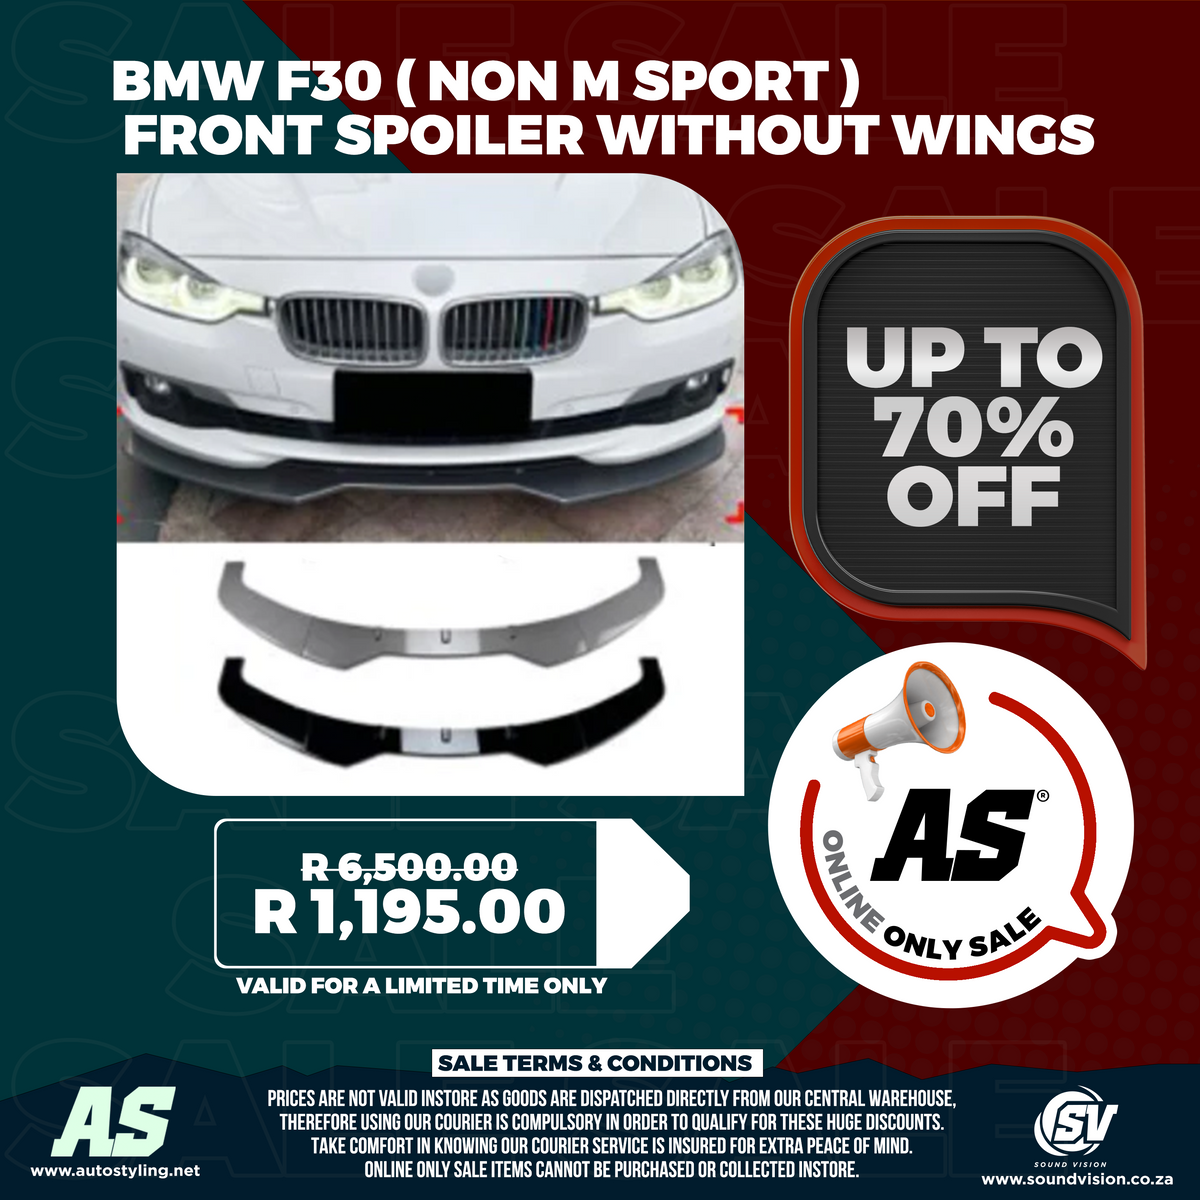 BMW F30 ( Non m sport ) front spoiler without wings